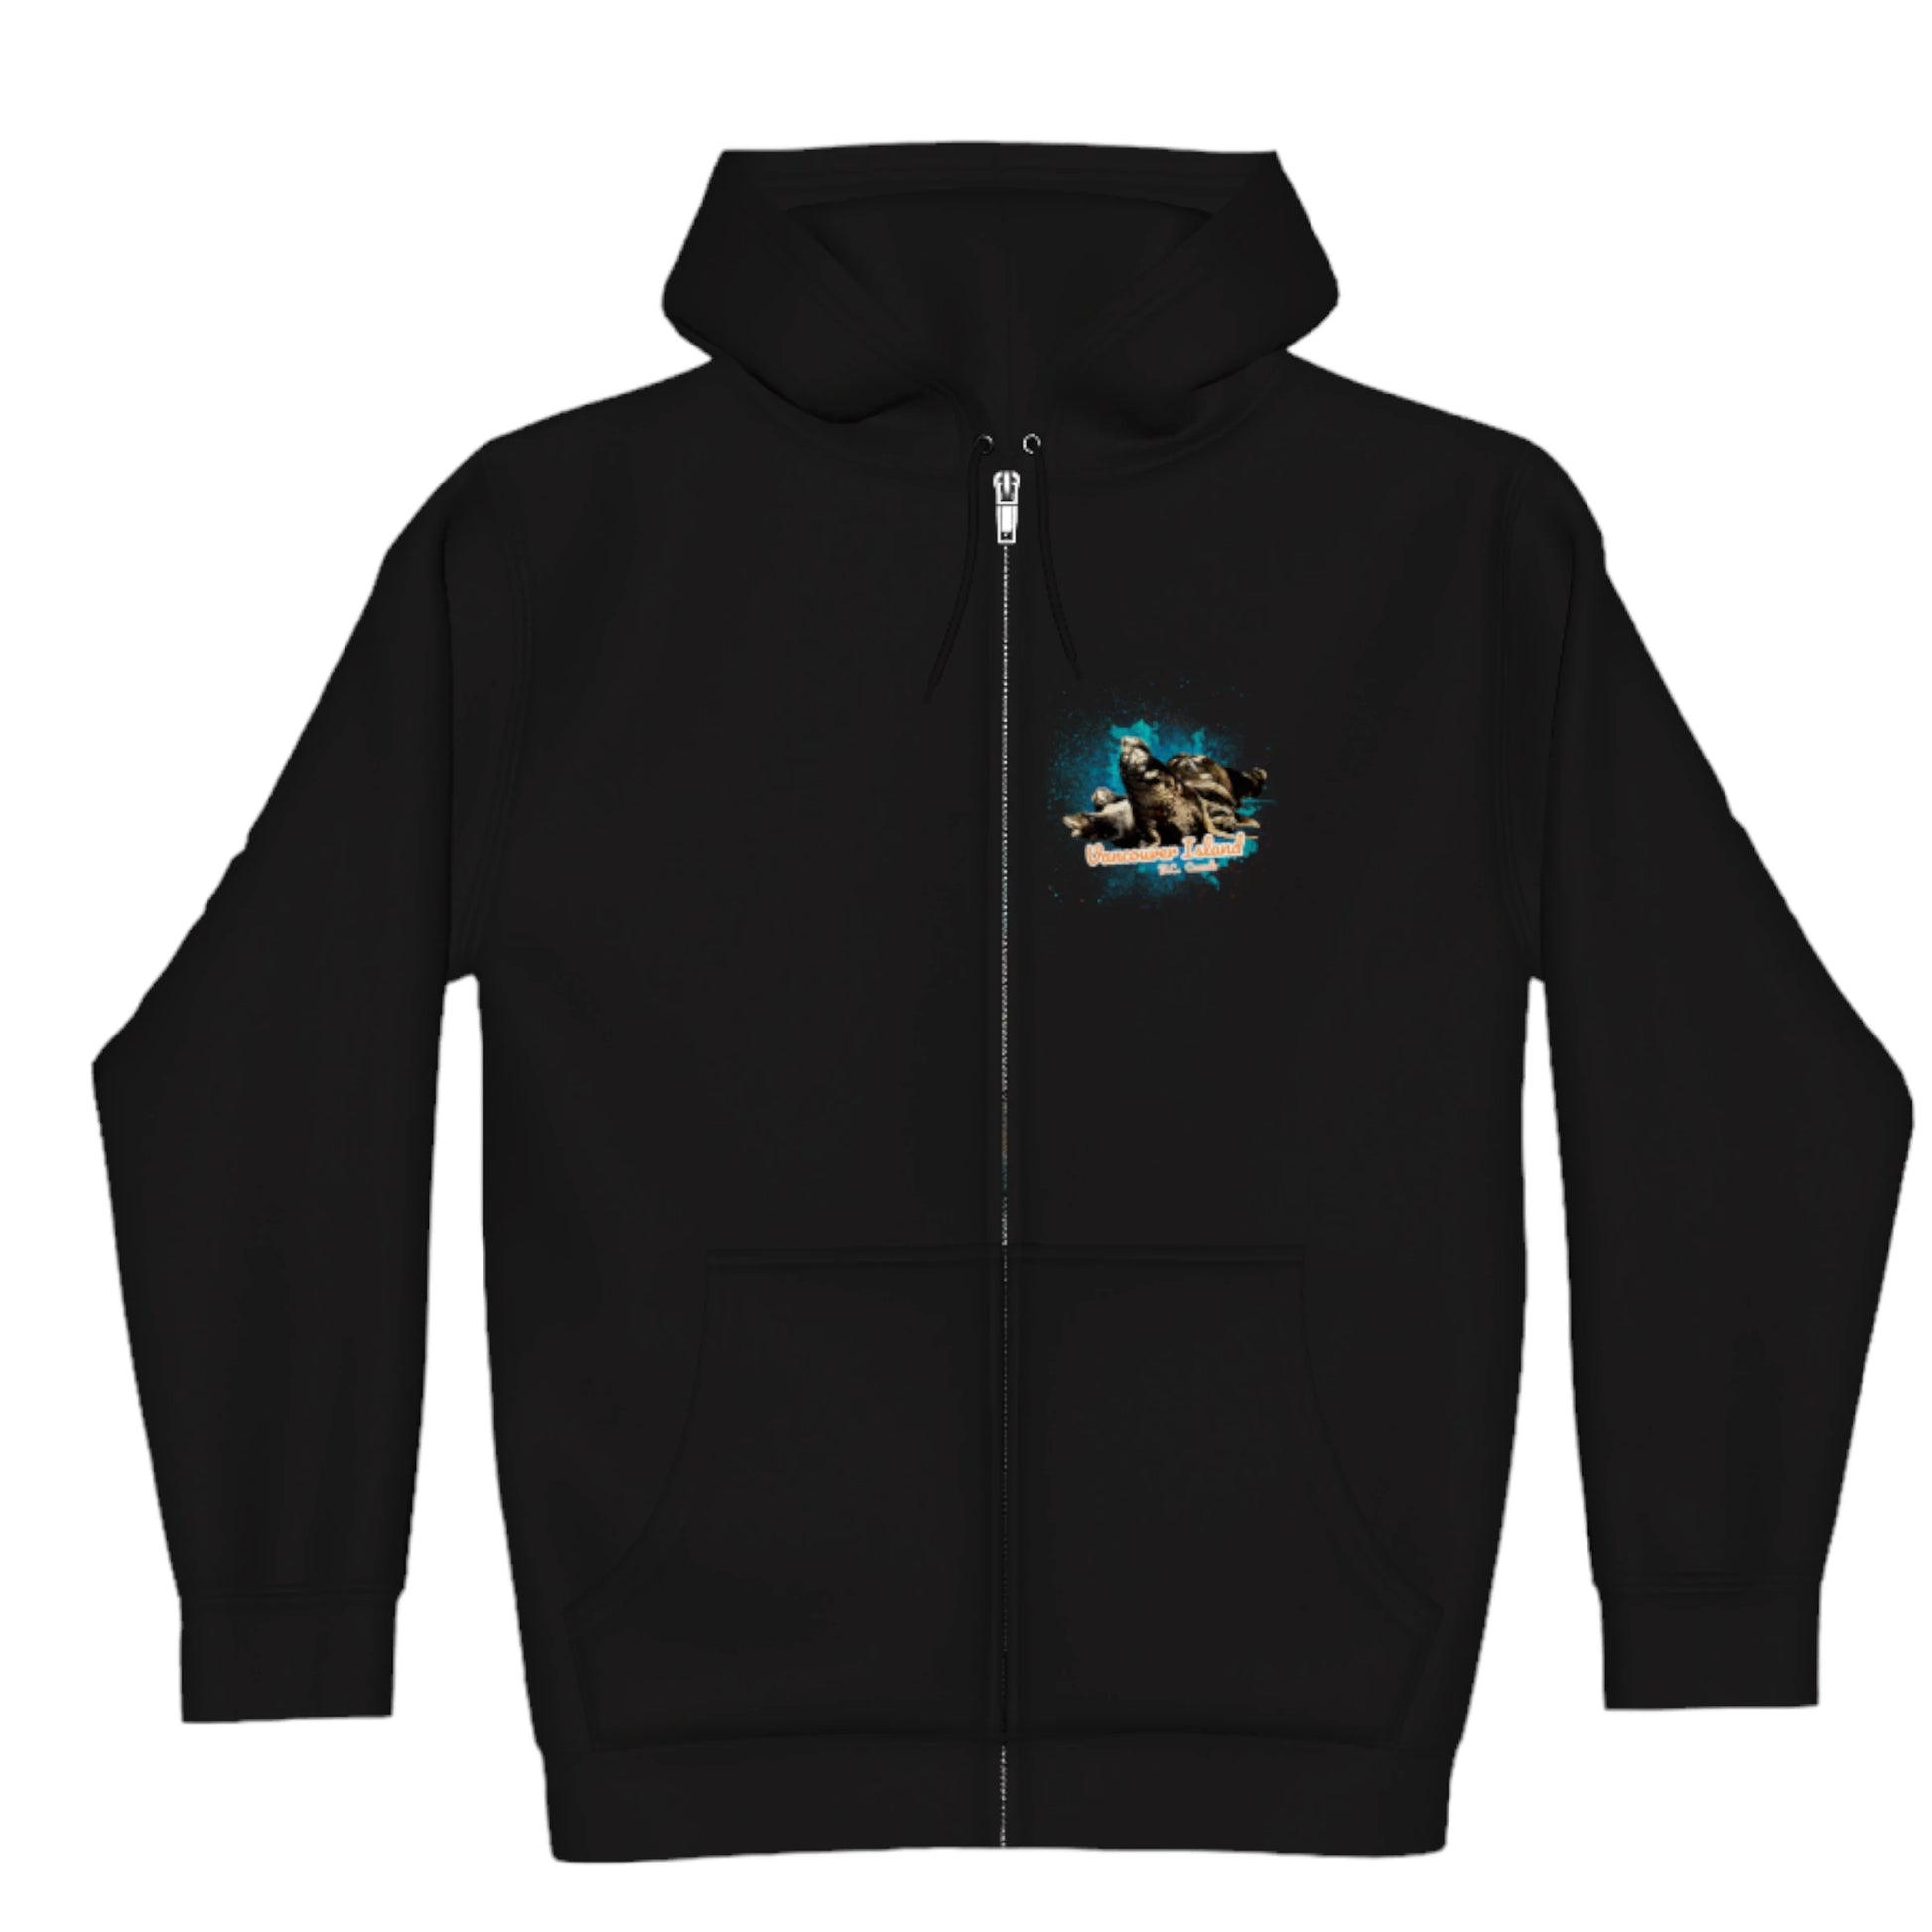 What's Up Sea Lions Vancouver Island BC Canada Premium Zipper Hoodie